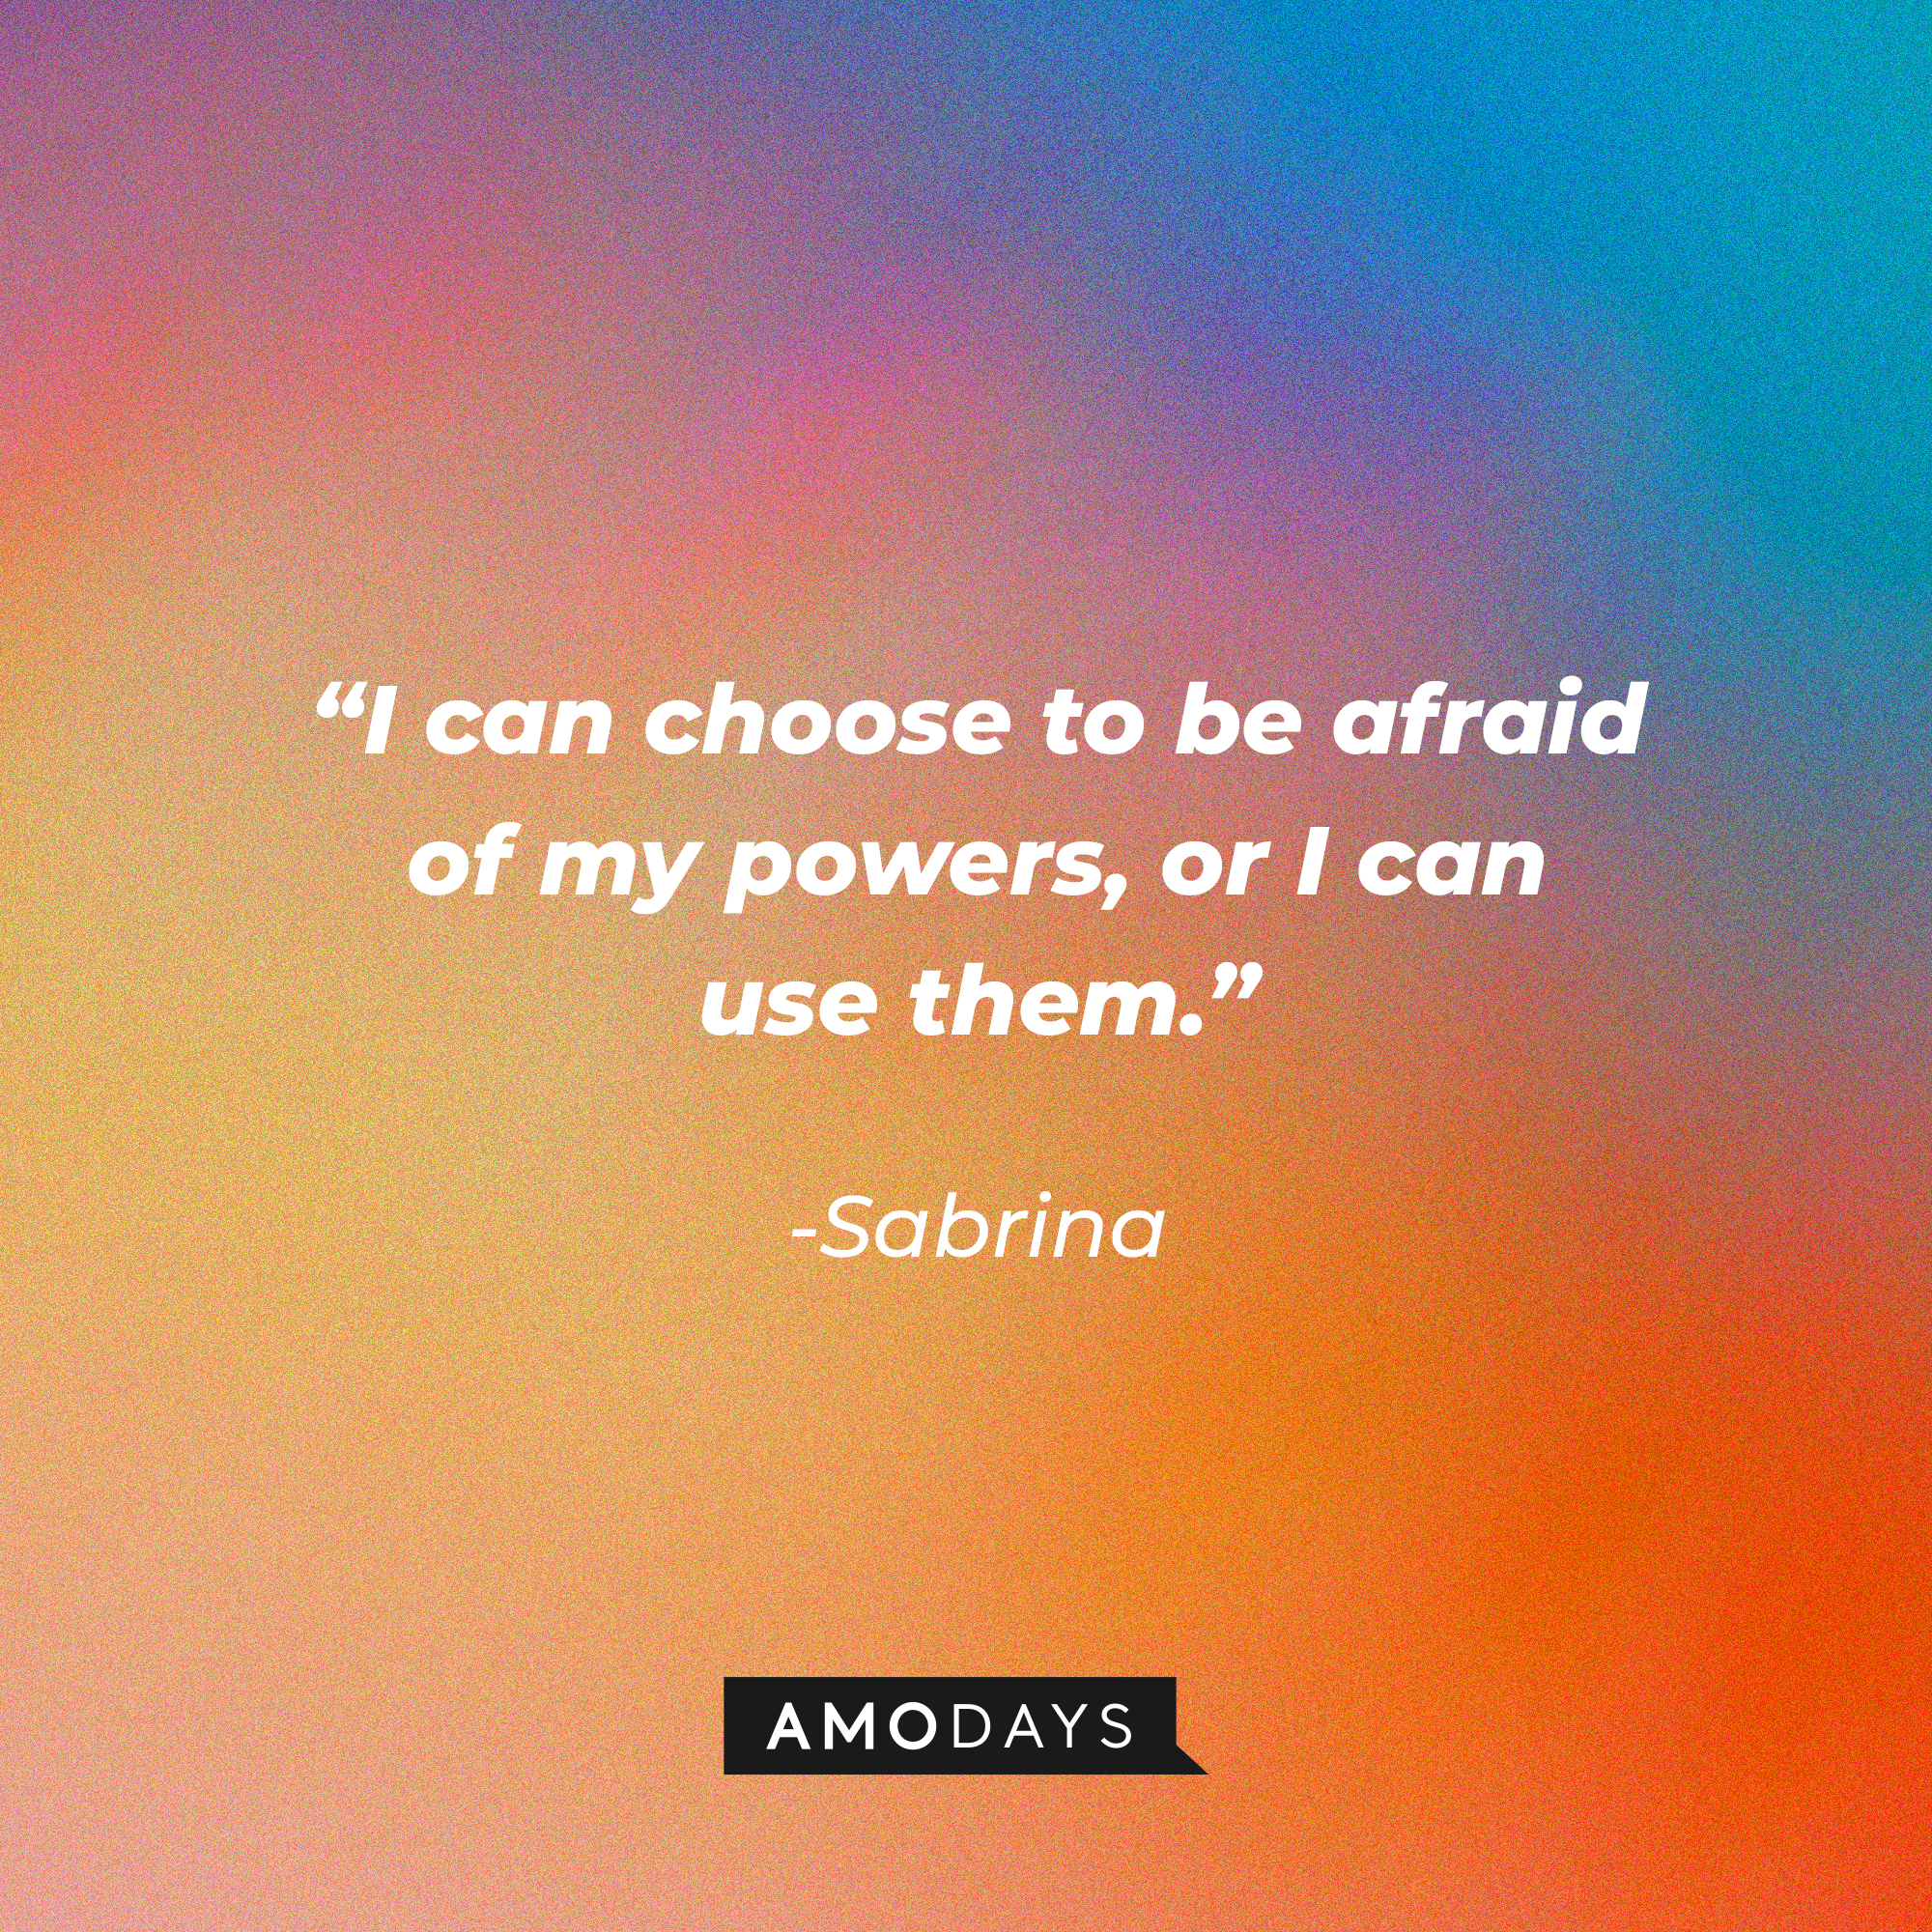 Sabrina's quote: “I can choose to be afraid of my powers, or I can use them.” | Source: Amodays